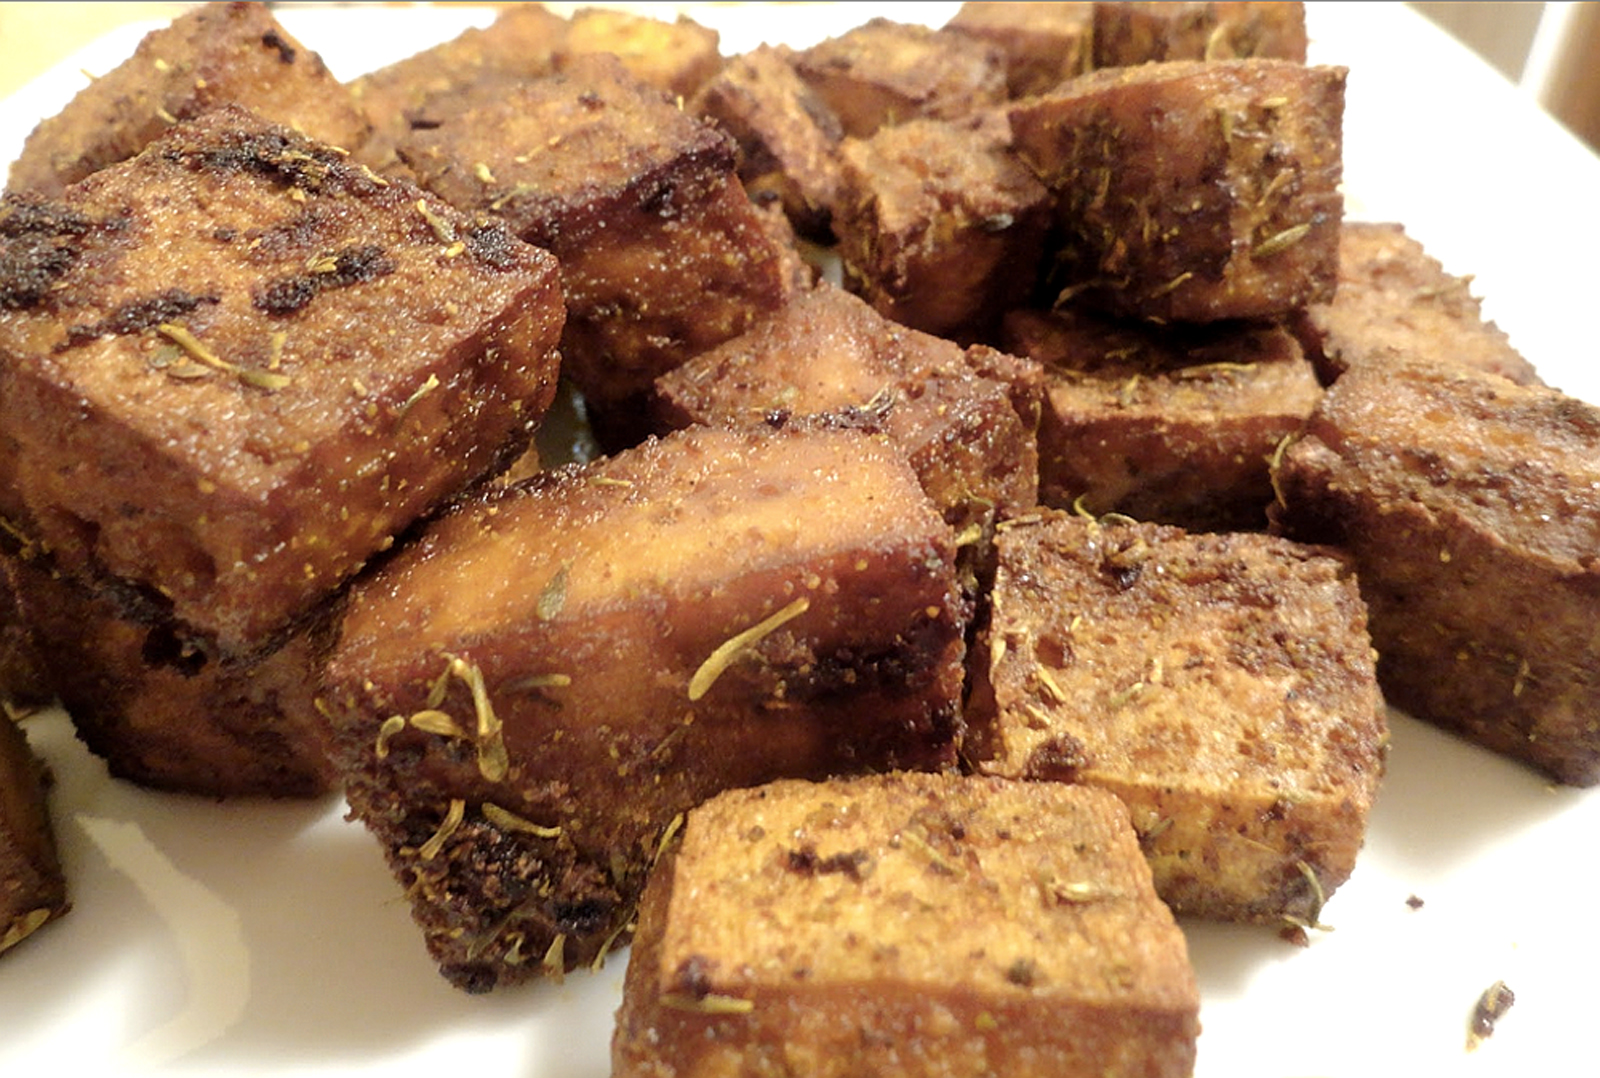 New Study Reveals Young Women Love Tofu -- But Not For The Reasons You Might Think!